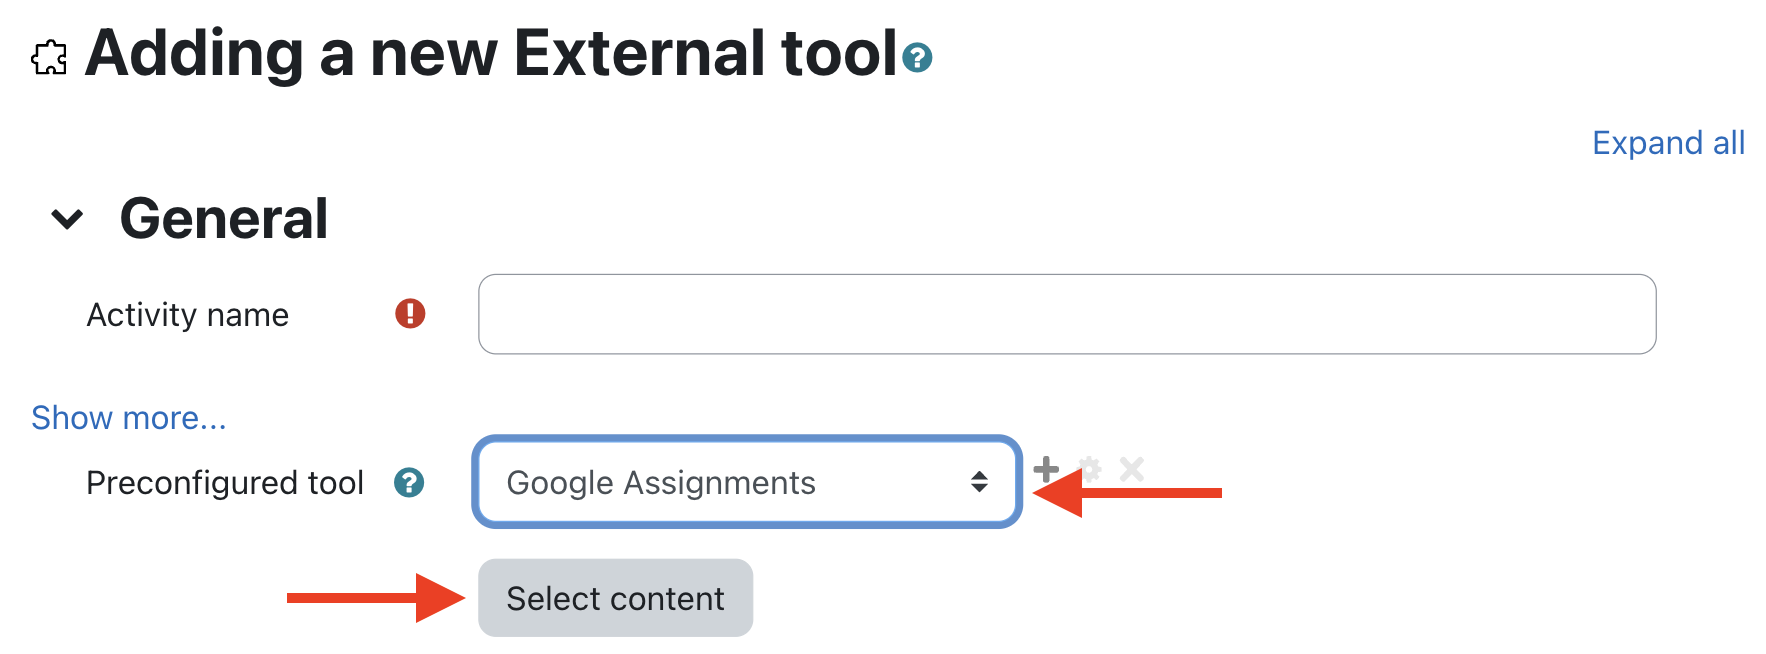 From the adding a new external tool page select Google Assignments from the Preconfigured tool drop down menu